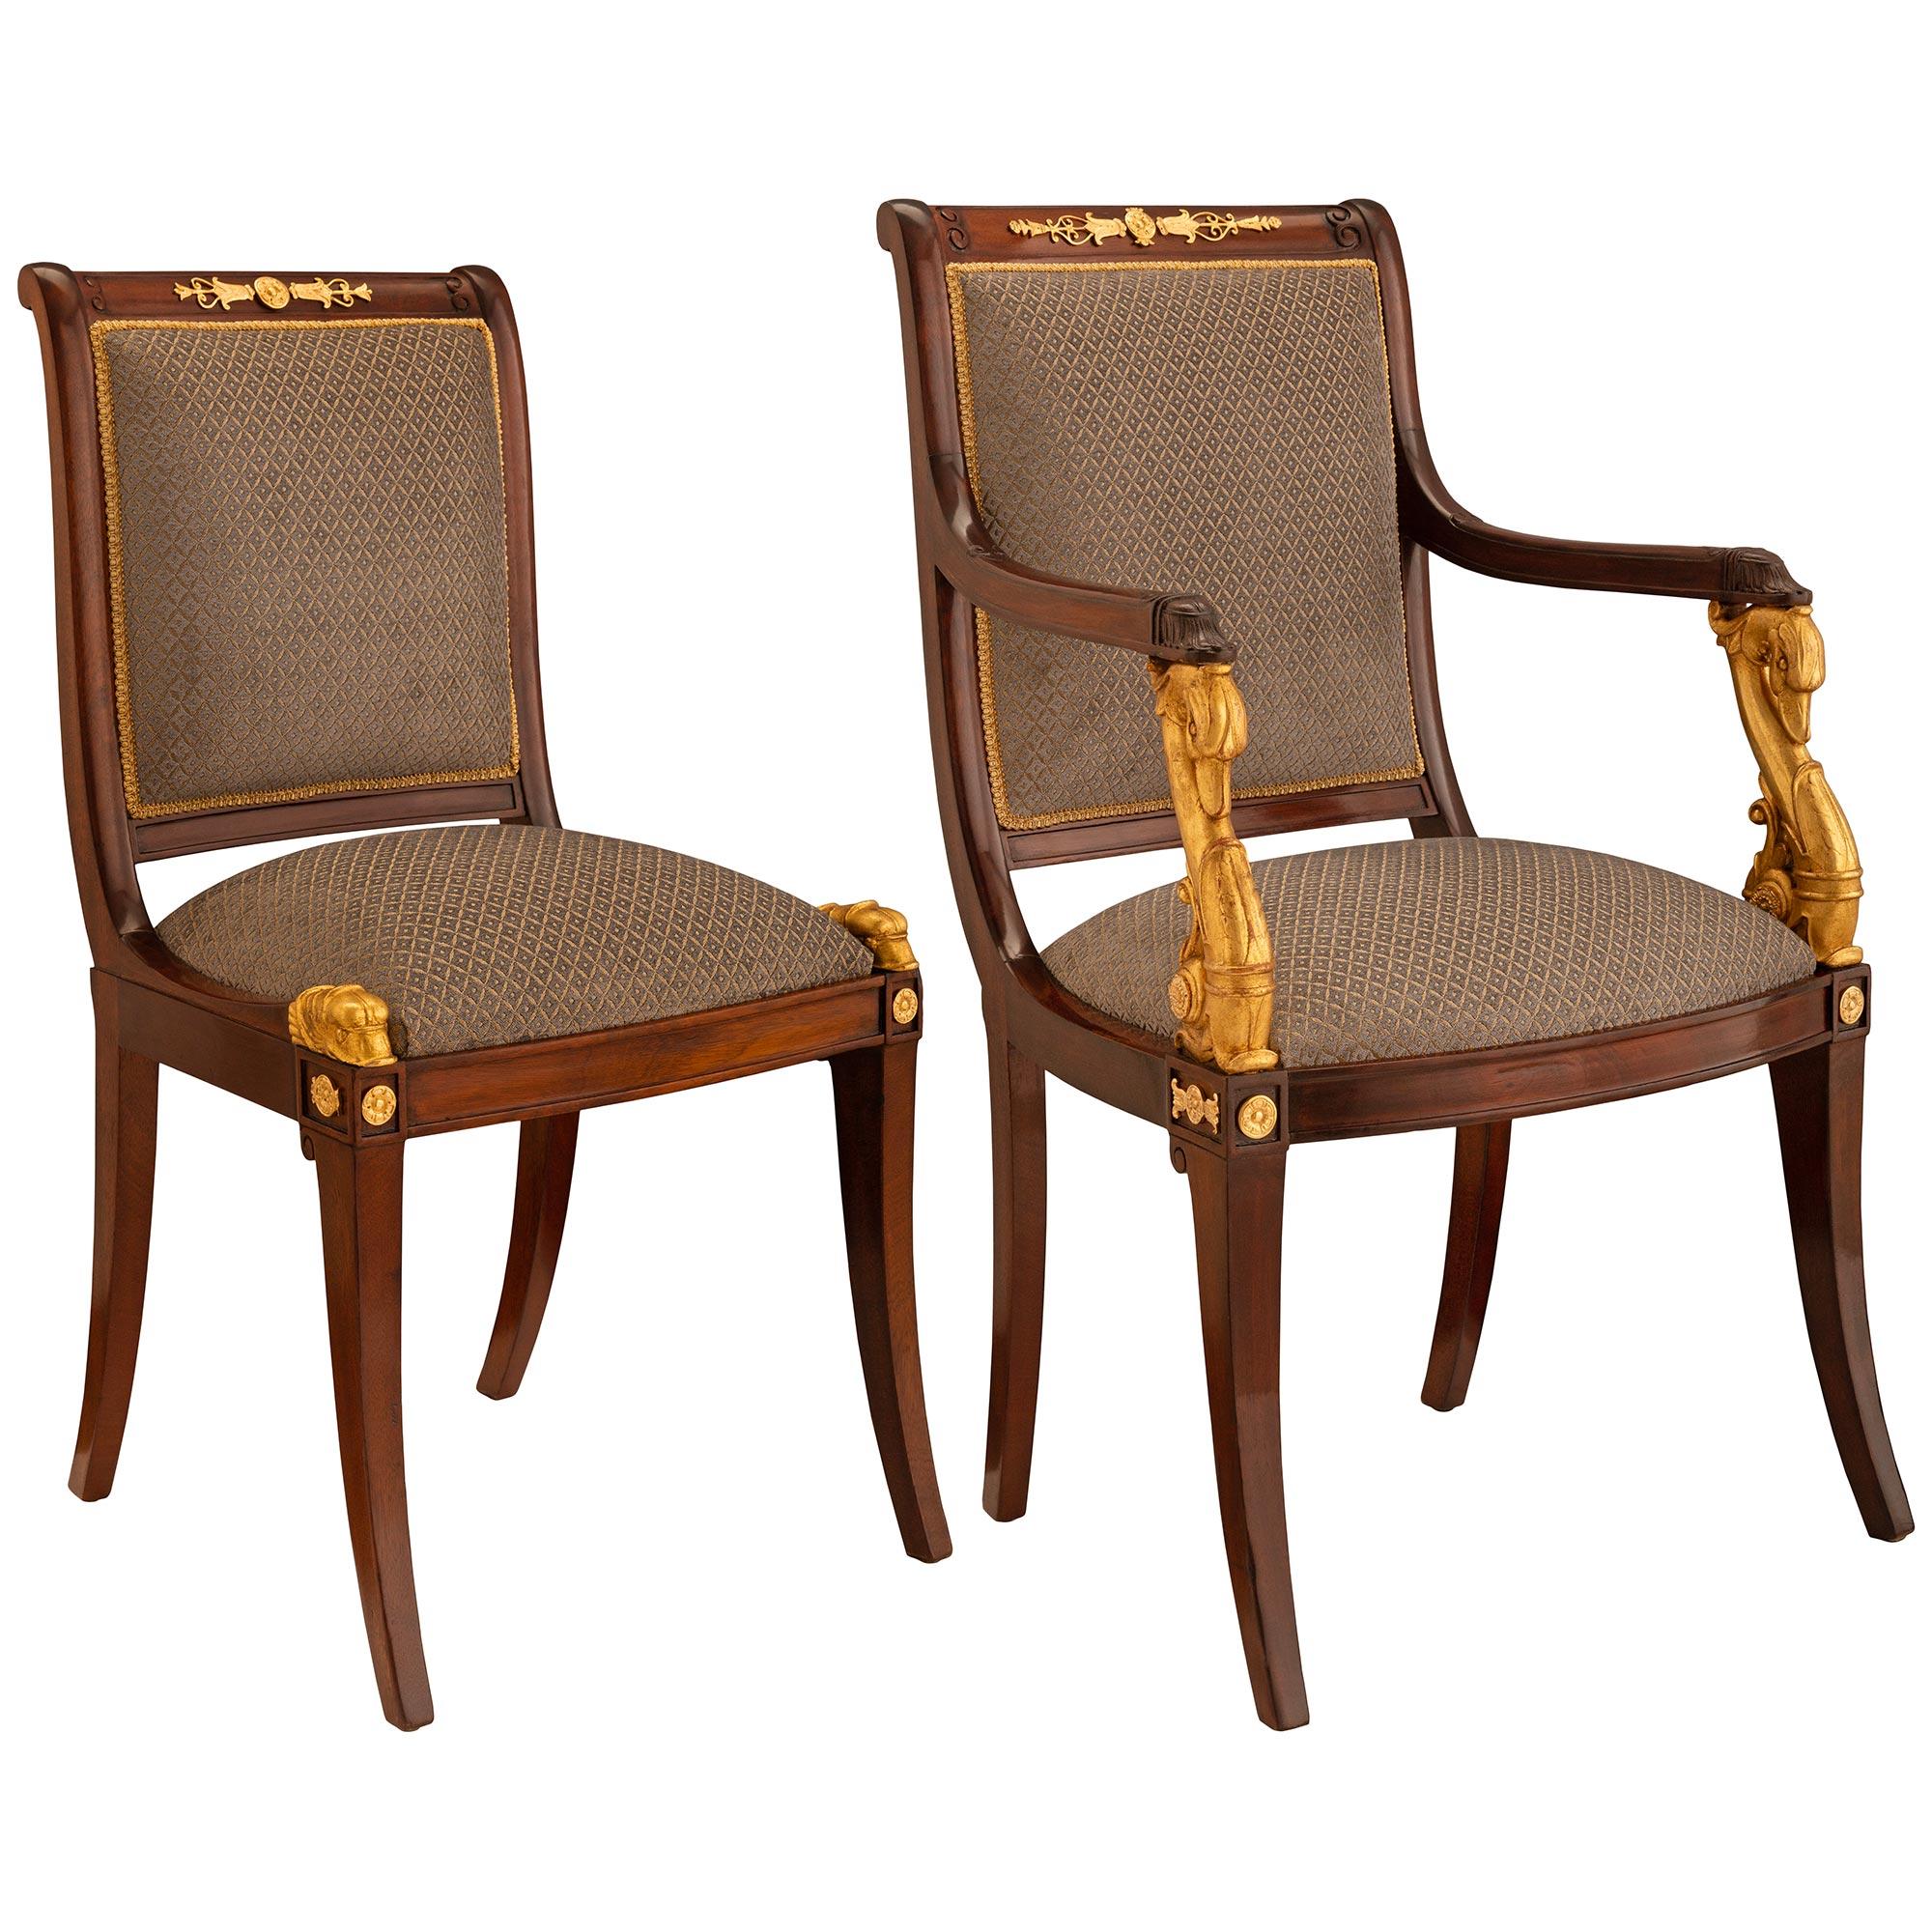 complete set of chairs